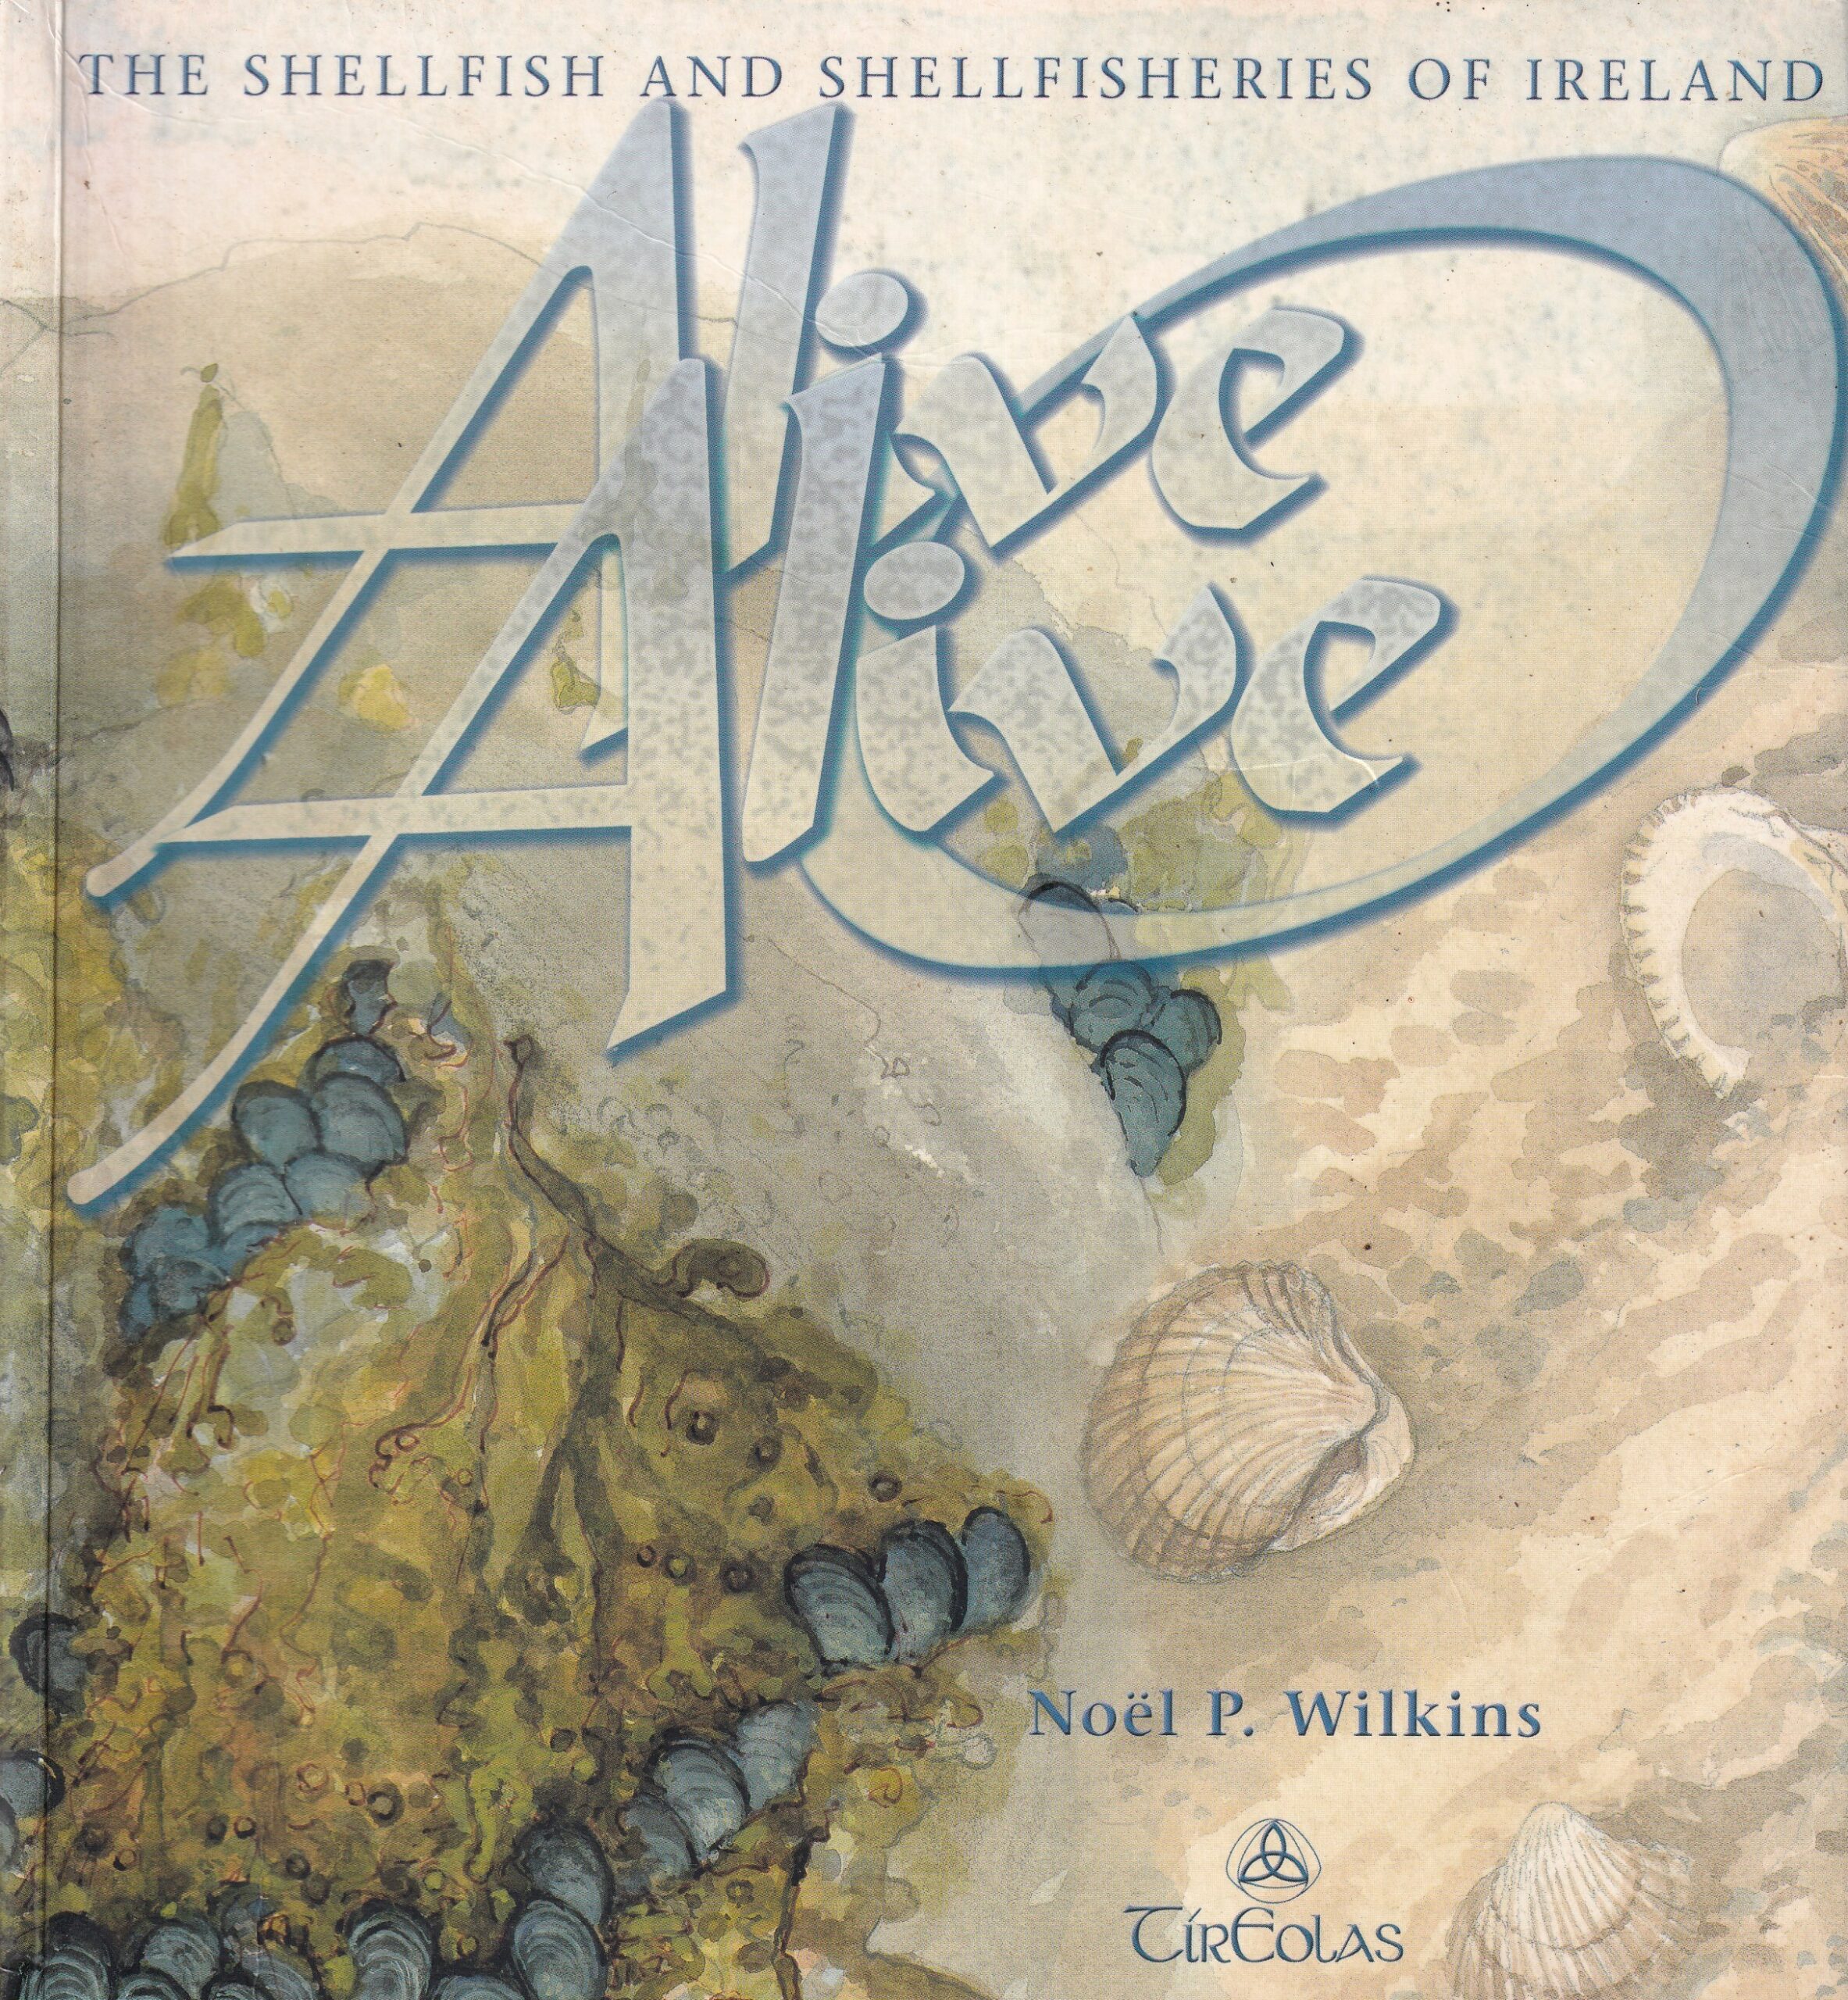 Alive Alive O: The Shellfish and Shellfisheries of Ireland by Noel P. Wilkins